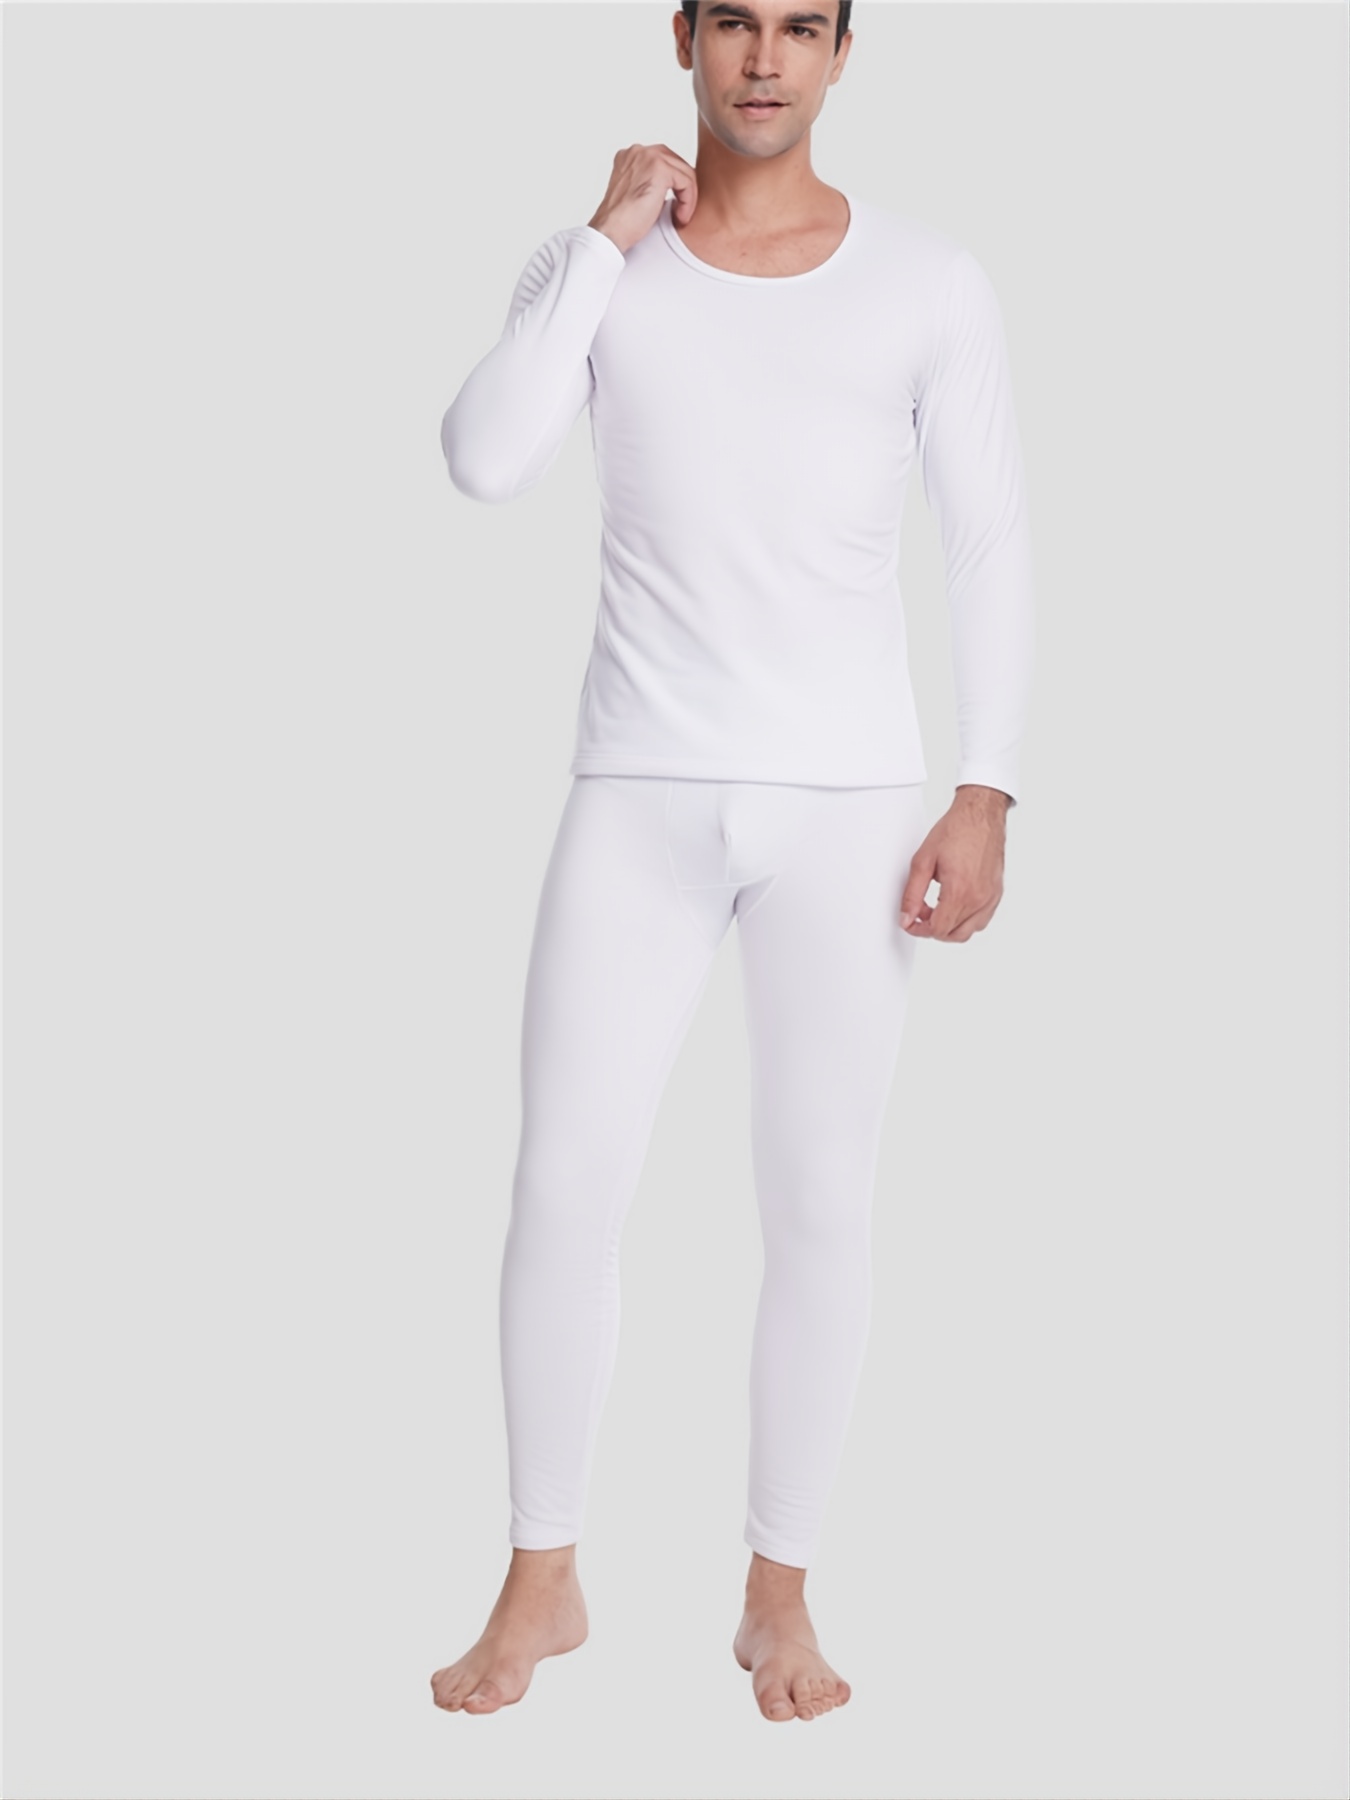 Men's Top Bottom Set Long Johns Thermal Underwear, With Base Layer Fleece  Lined